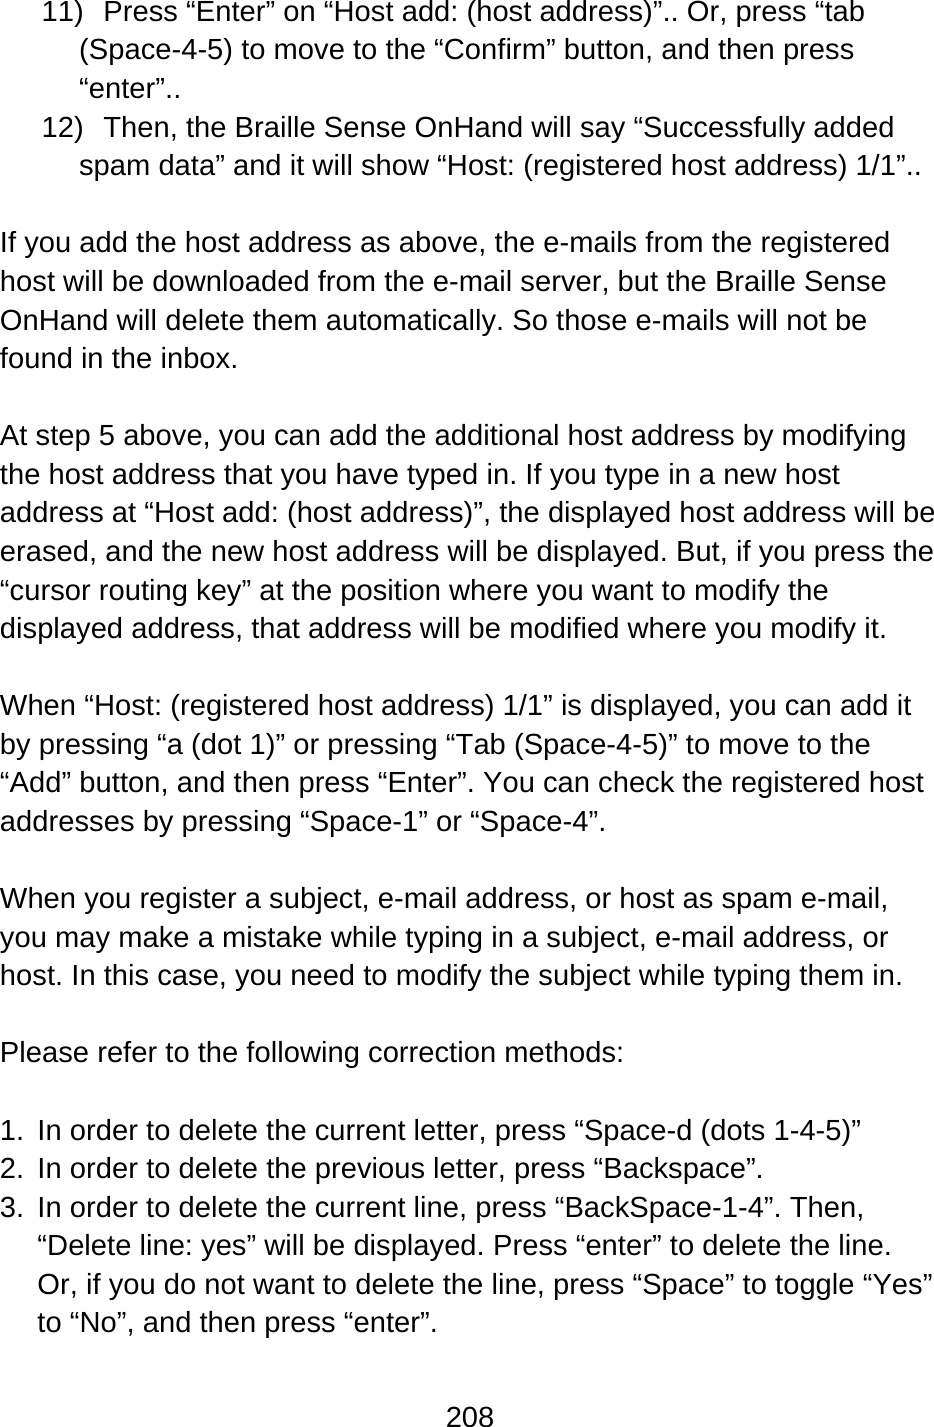 208  11)  Press “Enter” on “Host add: (host address)”.. Or, press “tab (Space-4-5) to move to the “Confirm” button, and then press “enter”.. 12)  Then, the Braille Sense OnHand will say “Successfully added spam data” and it will show “Host: (registered host address) 1/1”..  If you add the host address as above, the e-mails from the registered host will be downloaded from the e-mail server, but the Braille Sense OnHand will delete them automatically. So those e-mails will not be found in the inbox.  At step 5 above, you can add the additional host address by modifying the host address that you have typed in. If you type in a new host address at “Host add: (host address)”, the displayed host address will be erased, and the new host address will be displayed. But, if you press the “cursor routing key” at the position where you want to modify the displayed address, that address will be modified where you modify it.  When “Host: (registered host address) 1/1” is displayed, you can add it by pressing “a (dot 1)” or pressing “Tab (Space-4-5)” to move to the “Add” button, and then press “Enter”. You can check the registered host addresses by pressing “Space-1” or “Space-4”.  When you register a subject, e-mail address, or host as spam e-mail, you may make a mistake while typing in a subject, e-mail address, or host. In this case, you need to modify the subject while typing them in.  Please refer to the following correction methods:  1.  In order to delete the current letter, press “Space-d (dots 1-4-5)” 2.  In order to delete the previous letter, press “Backspace”. 3.  In order to delete the current line, press “BackSpace-1-4”. Then, “Delete line: yes” will be displayed. Press “enter” to delete the line.   Or, if you do not want to delete the line, press “Space” to toggle “Yes” to “No”, and then press “enter”.  